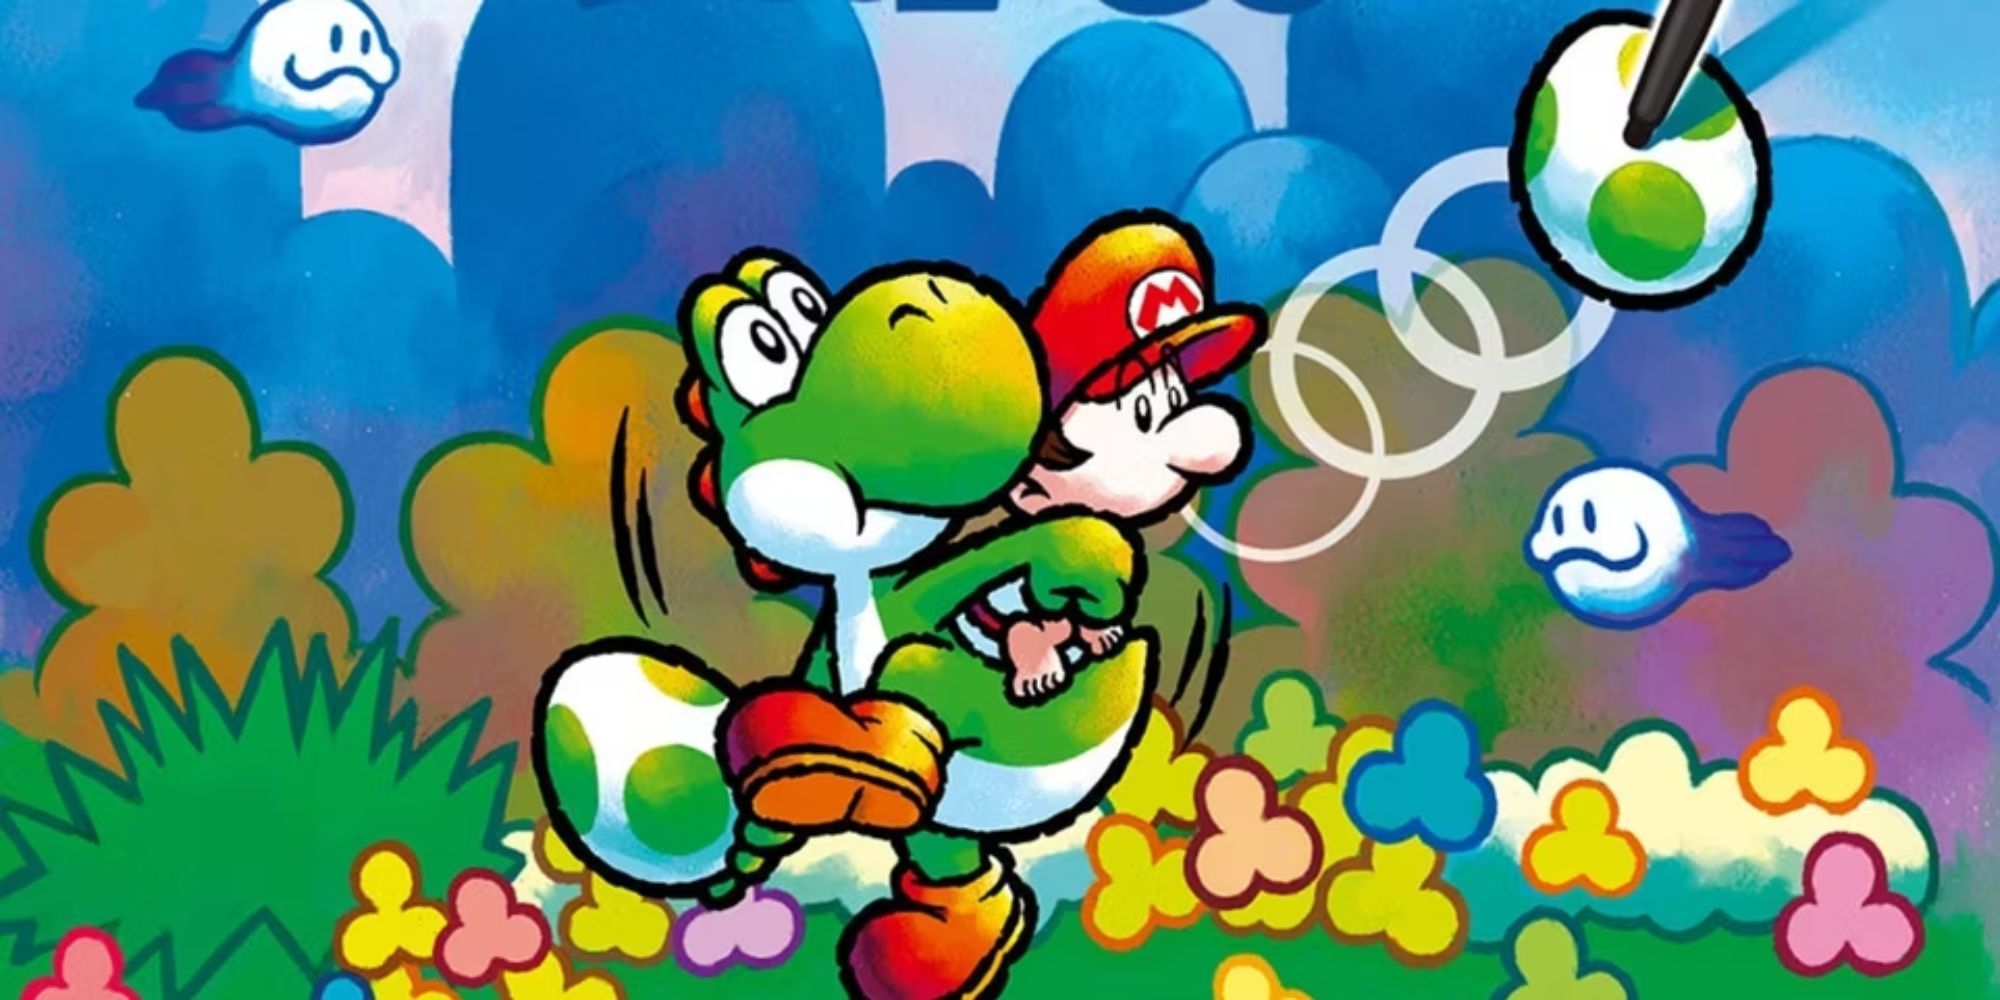 Yoshi prepares to throw an egg while Baby Mario is on his back